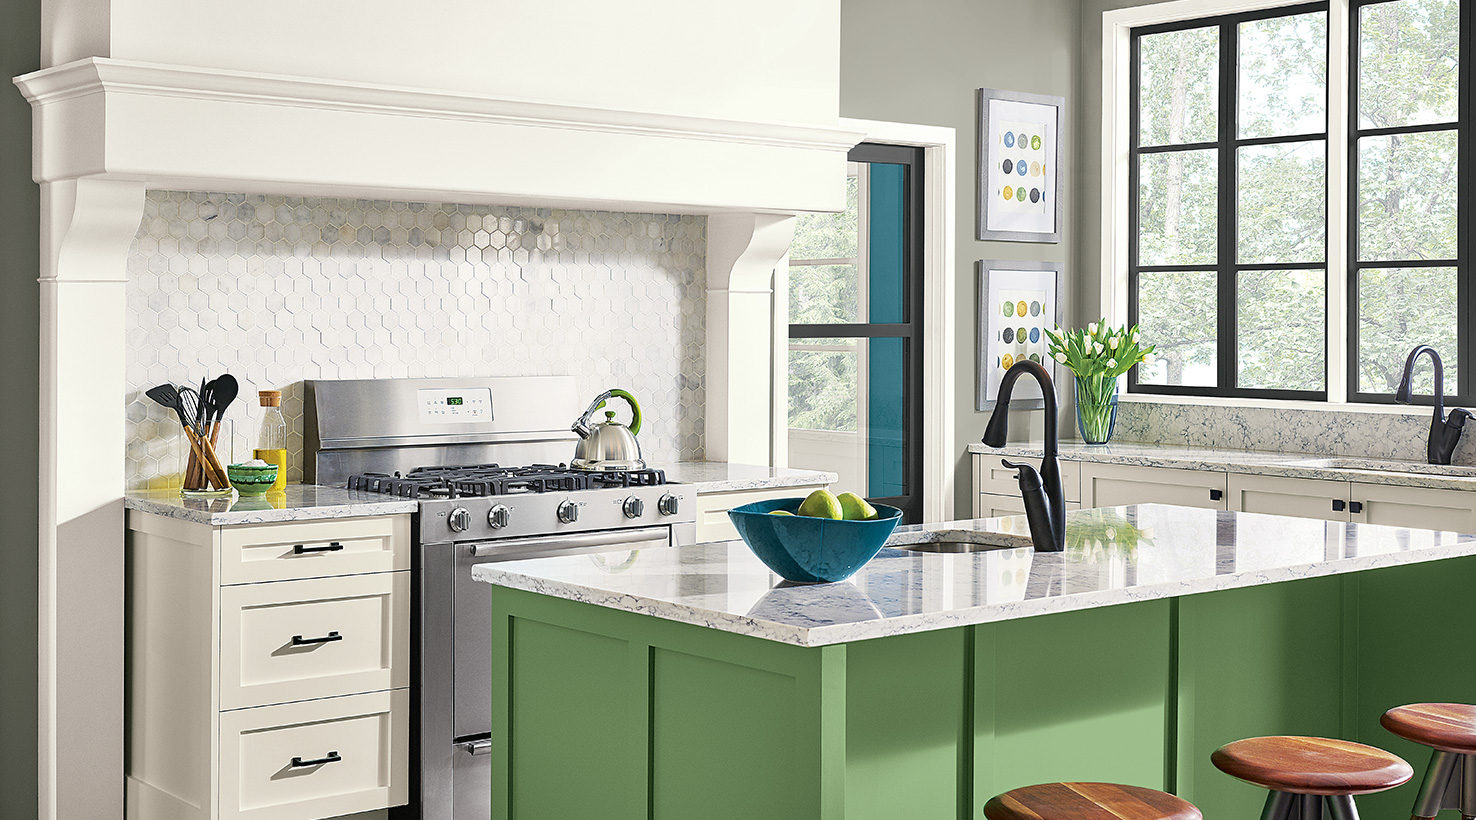 Kitchen Paint Color Ideas Inspiration, What Is The Best Sherwin Williams Paint Color For Kitchen Cabinets